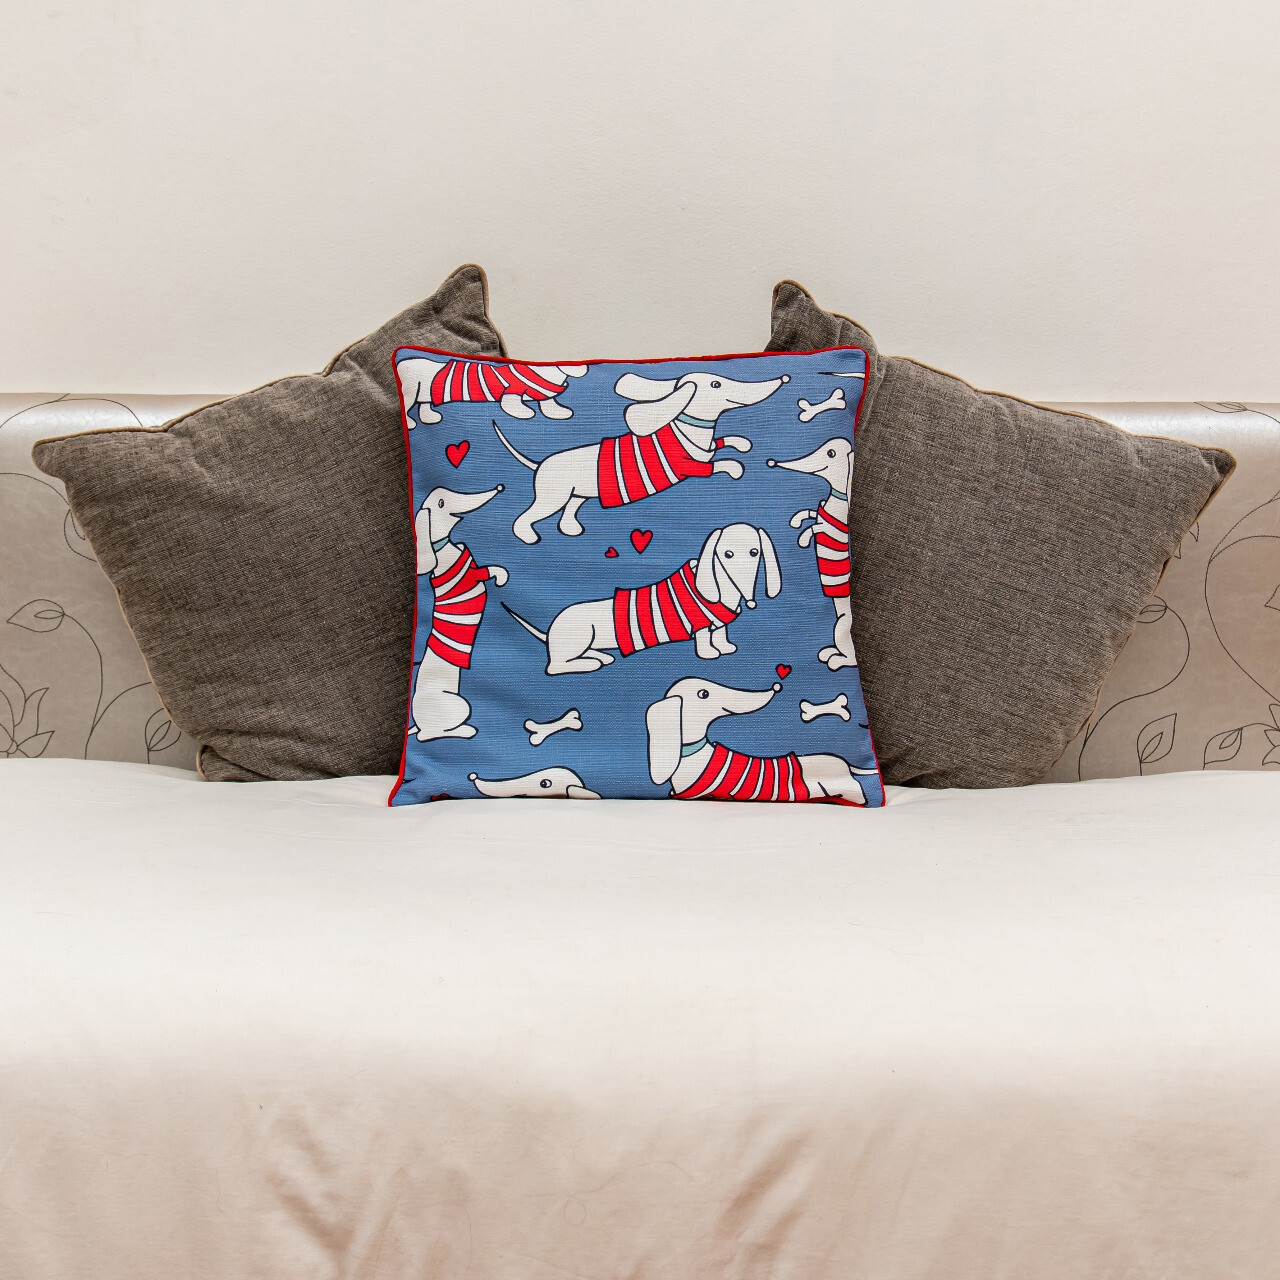 Large Scatter Cushion Slip - Blue with Dachshunds in red coats